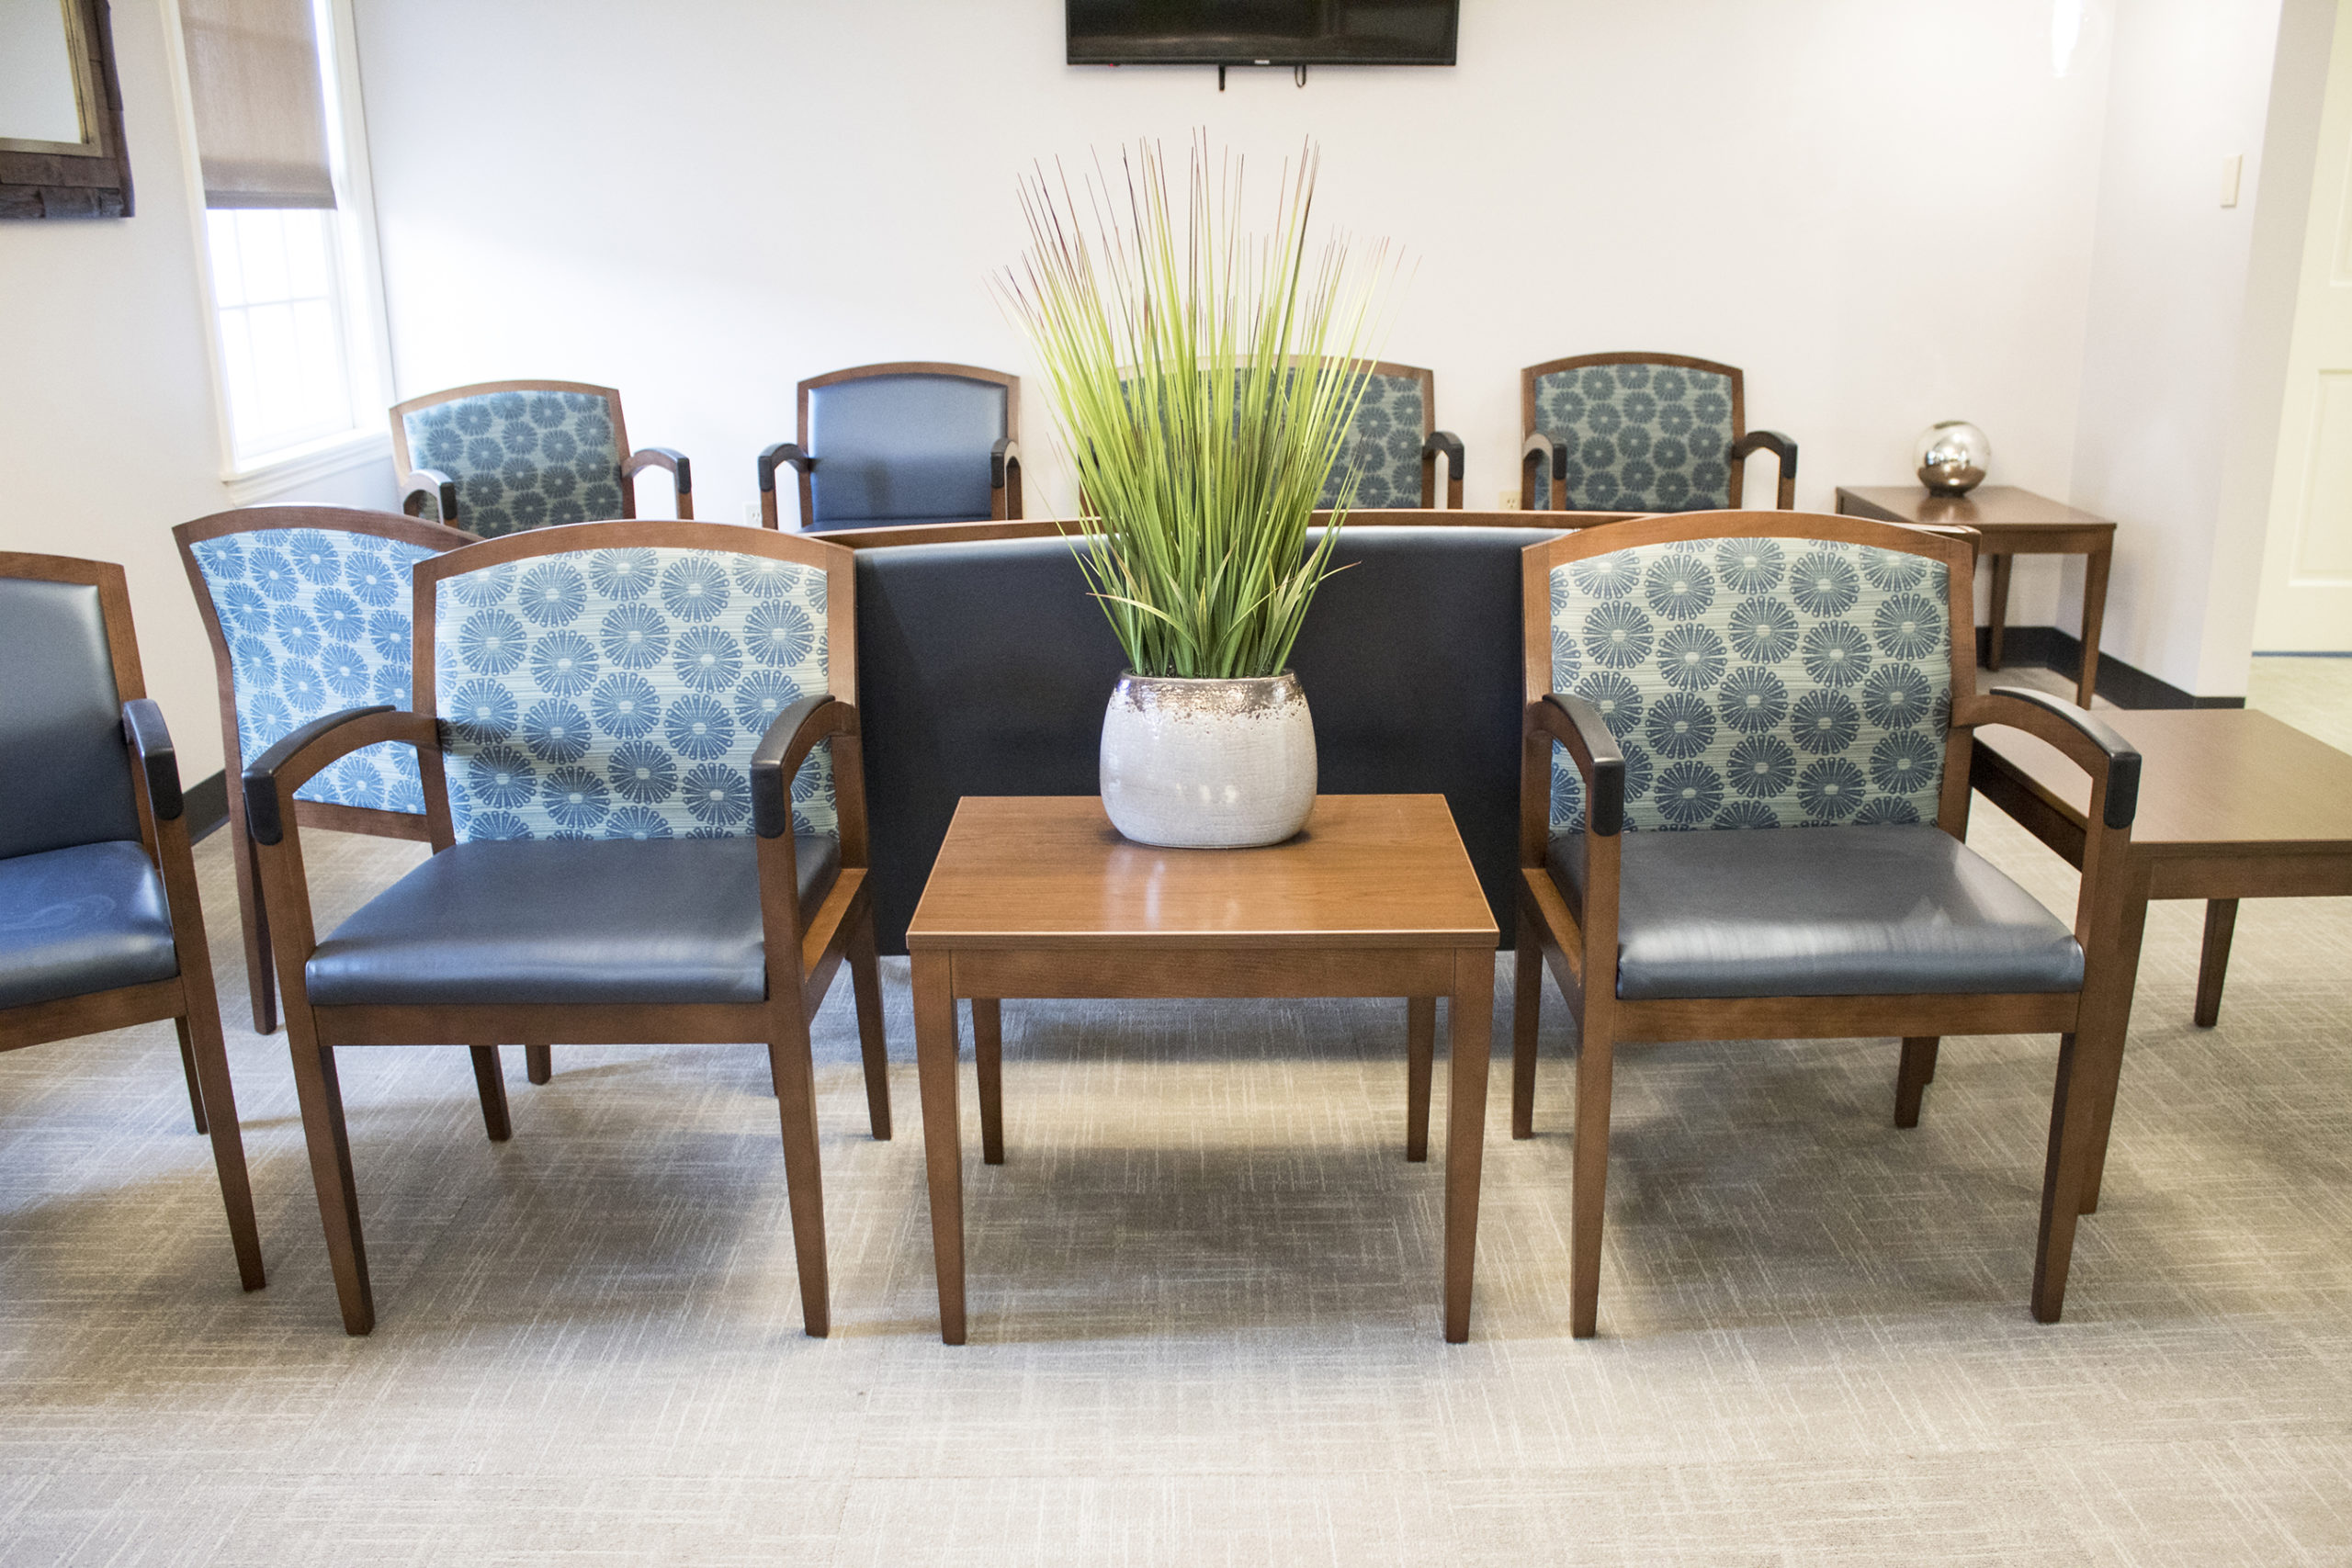 Two Chairs and Table in Waiting Room